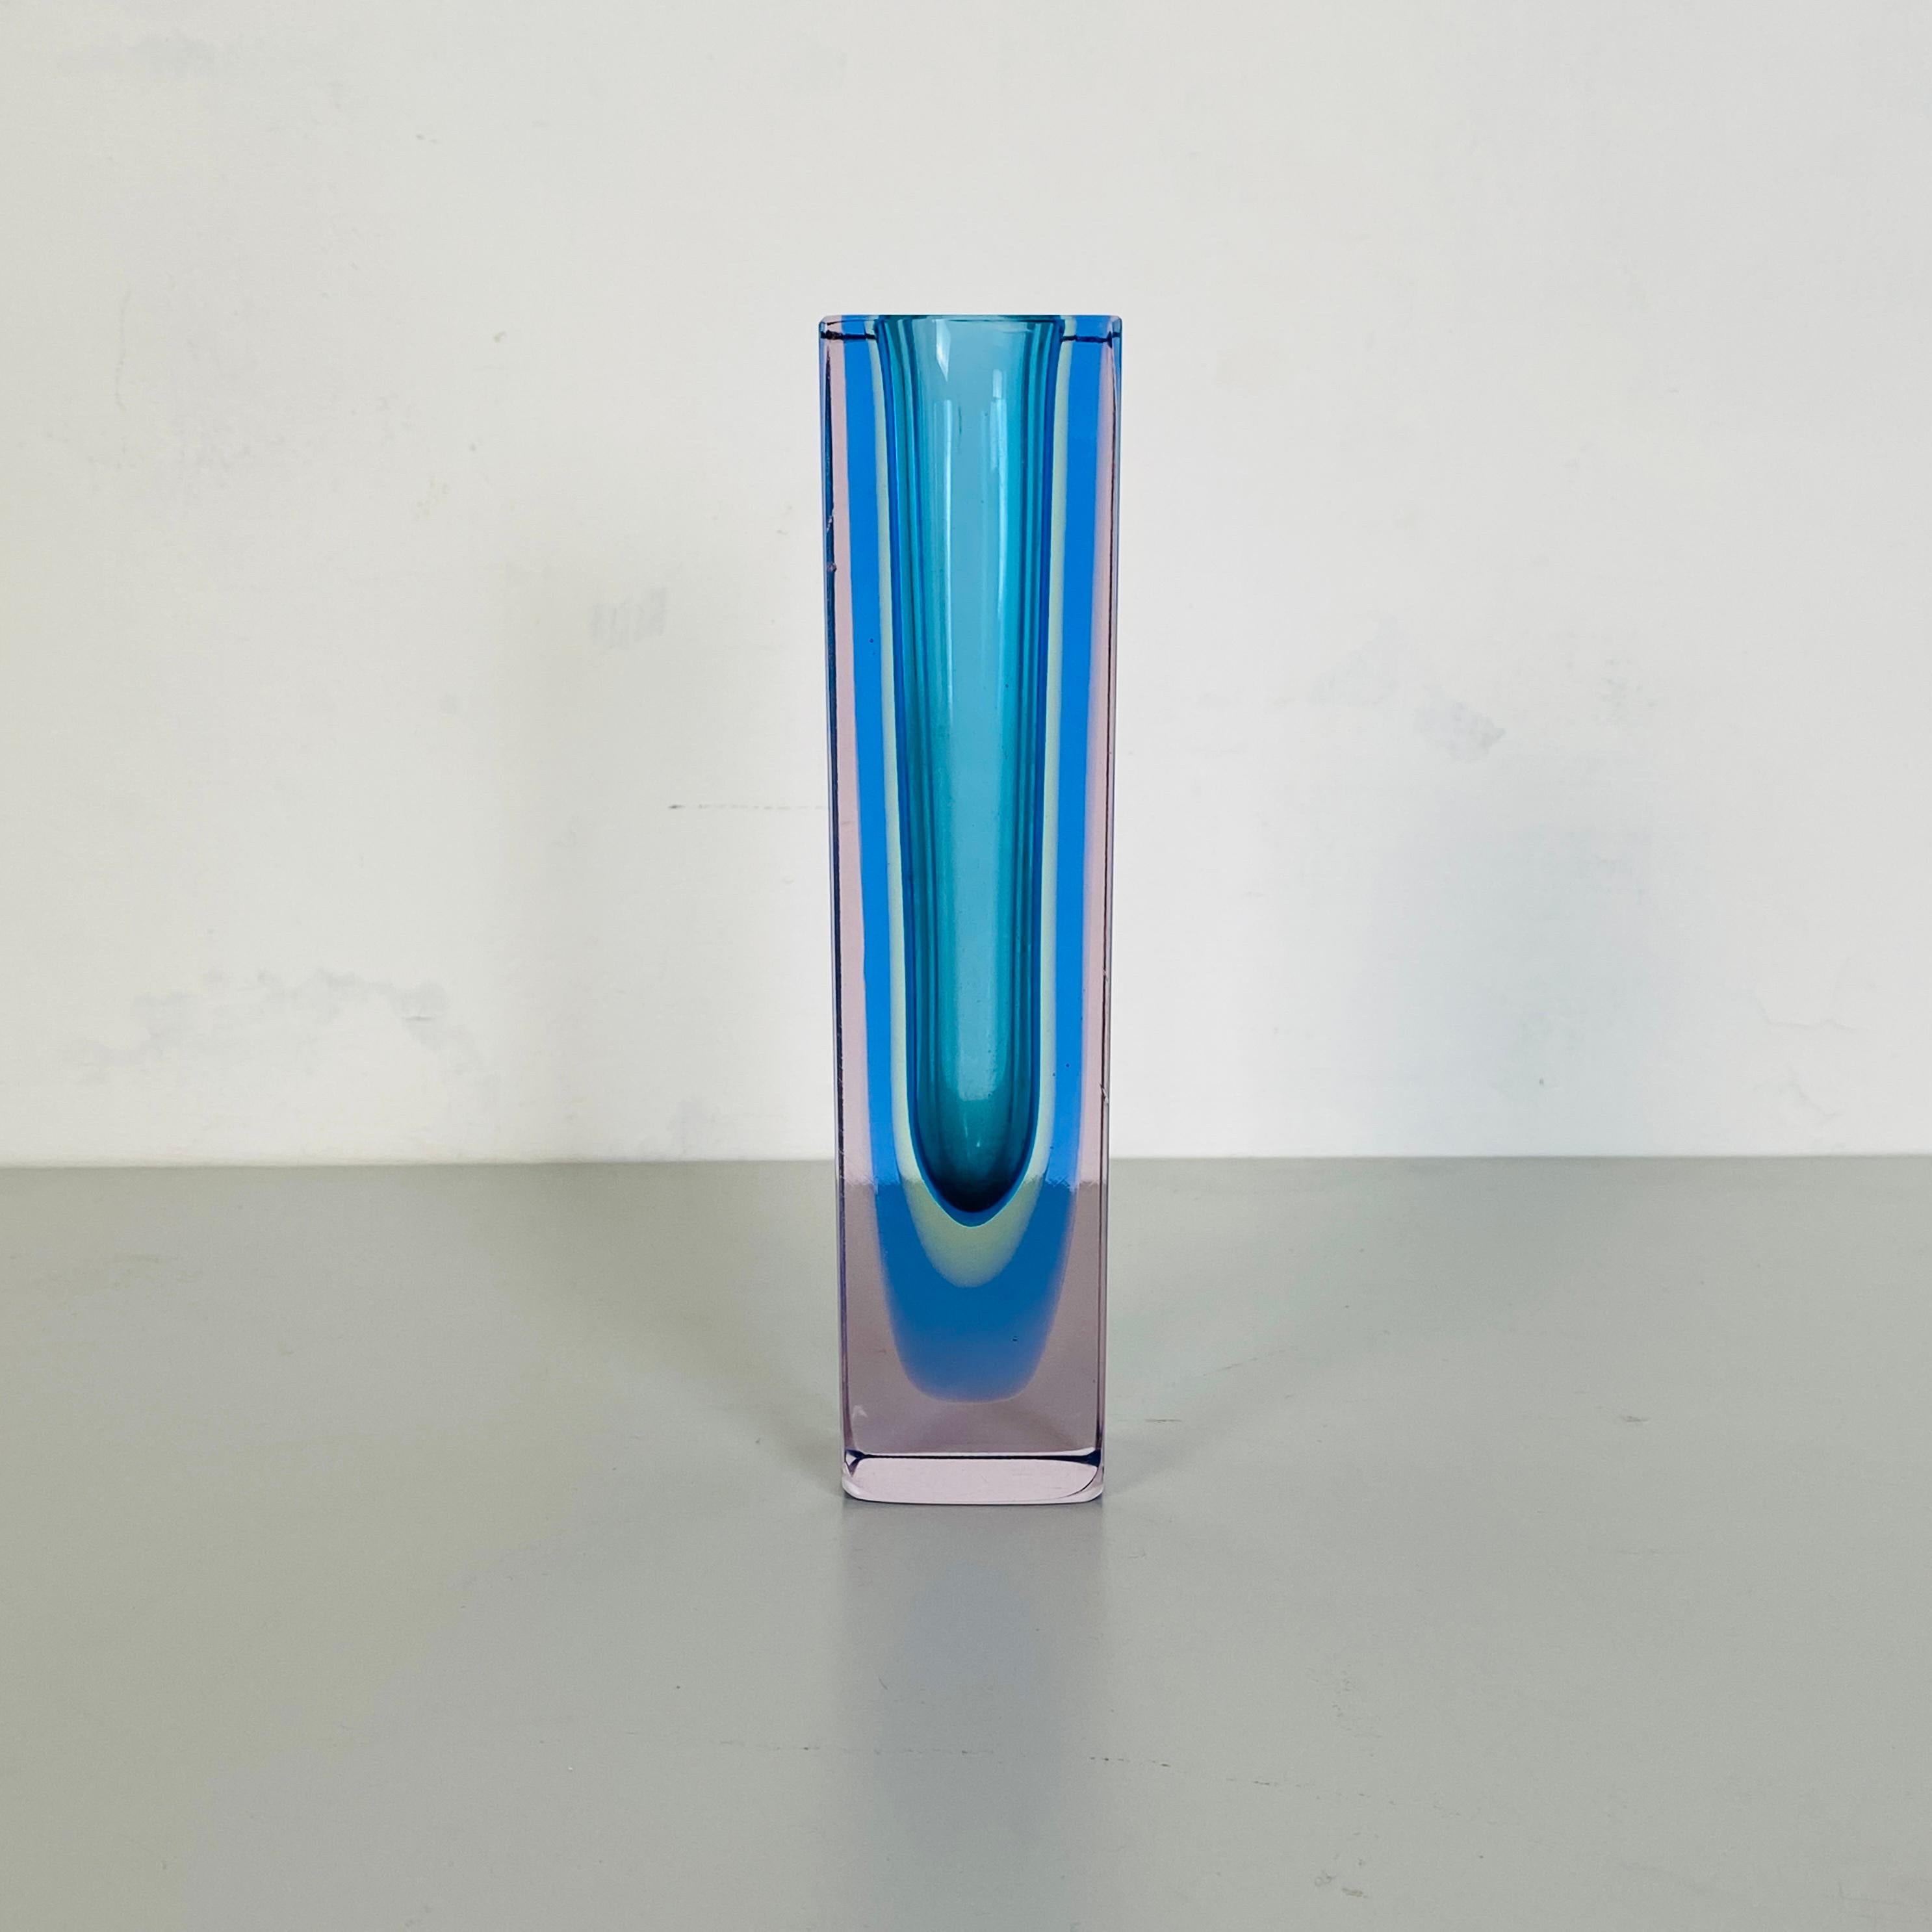 Italian Mid-Century Modern blue, acquamarina blue and trasparent murano glass from the Sommersi series, 1970s Murano Italy
This Fantastic series of Murano glass vase with various colored shades, is the 